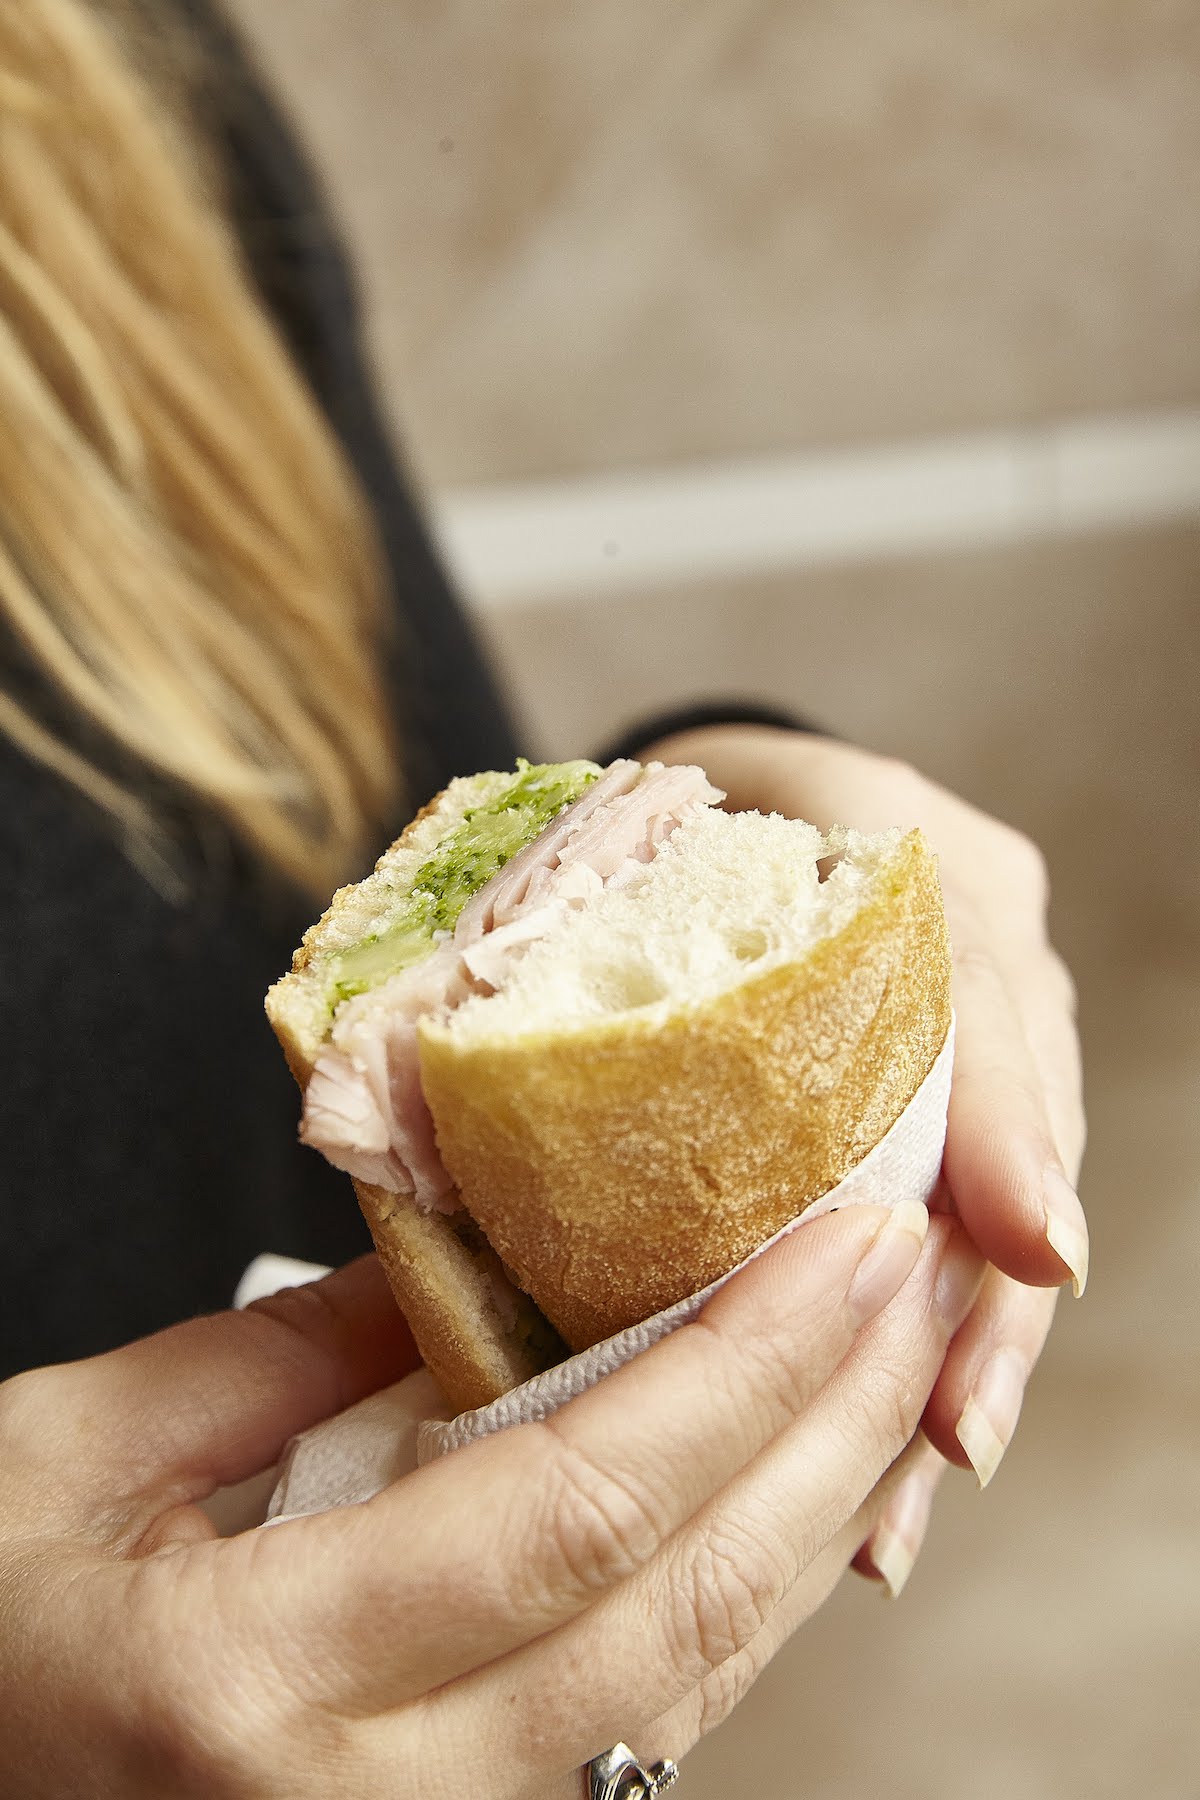 Close up of a person holding a small sandwich with prosciutto and broccoli